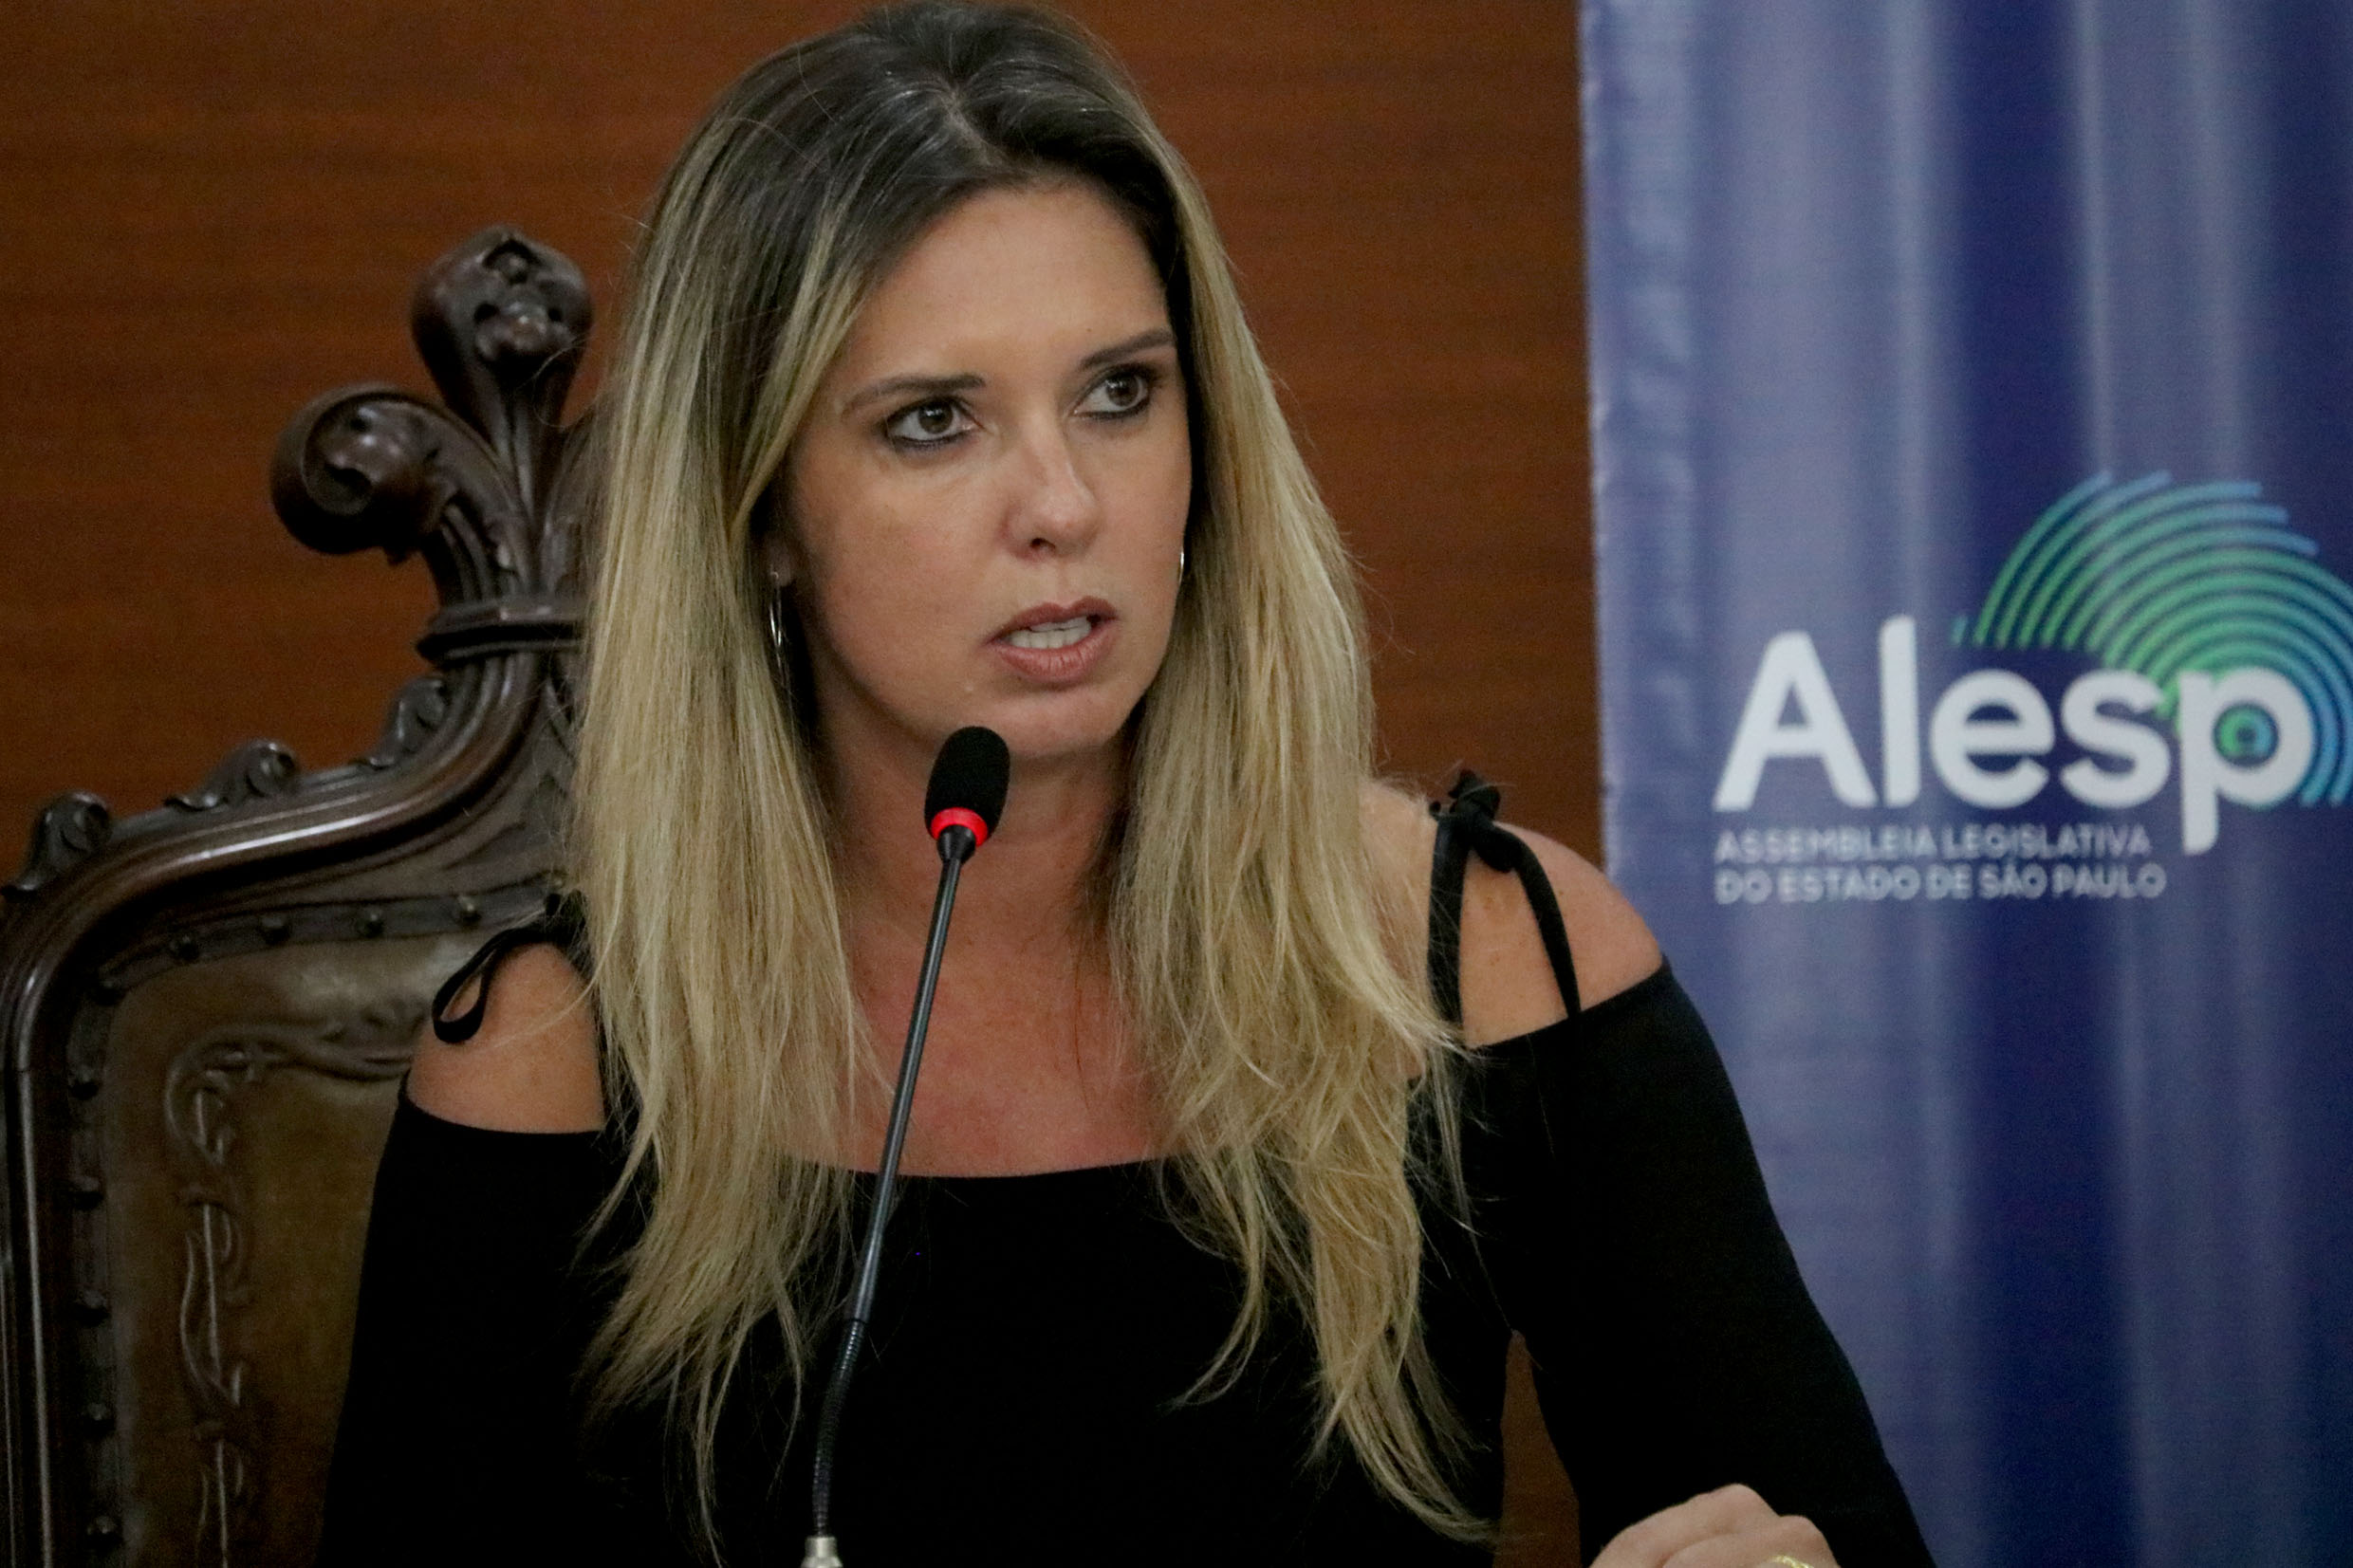  Elisangela Maziero<a style='float:right' href='https://www3.al.sp.gov.br/repositorio/noticia/N-04-2022/fg285943.jpg' target=_blank><img src='/_img/material-file-download-white.png' width='14px' alt='Clique para baixar a imagem'></a>